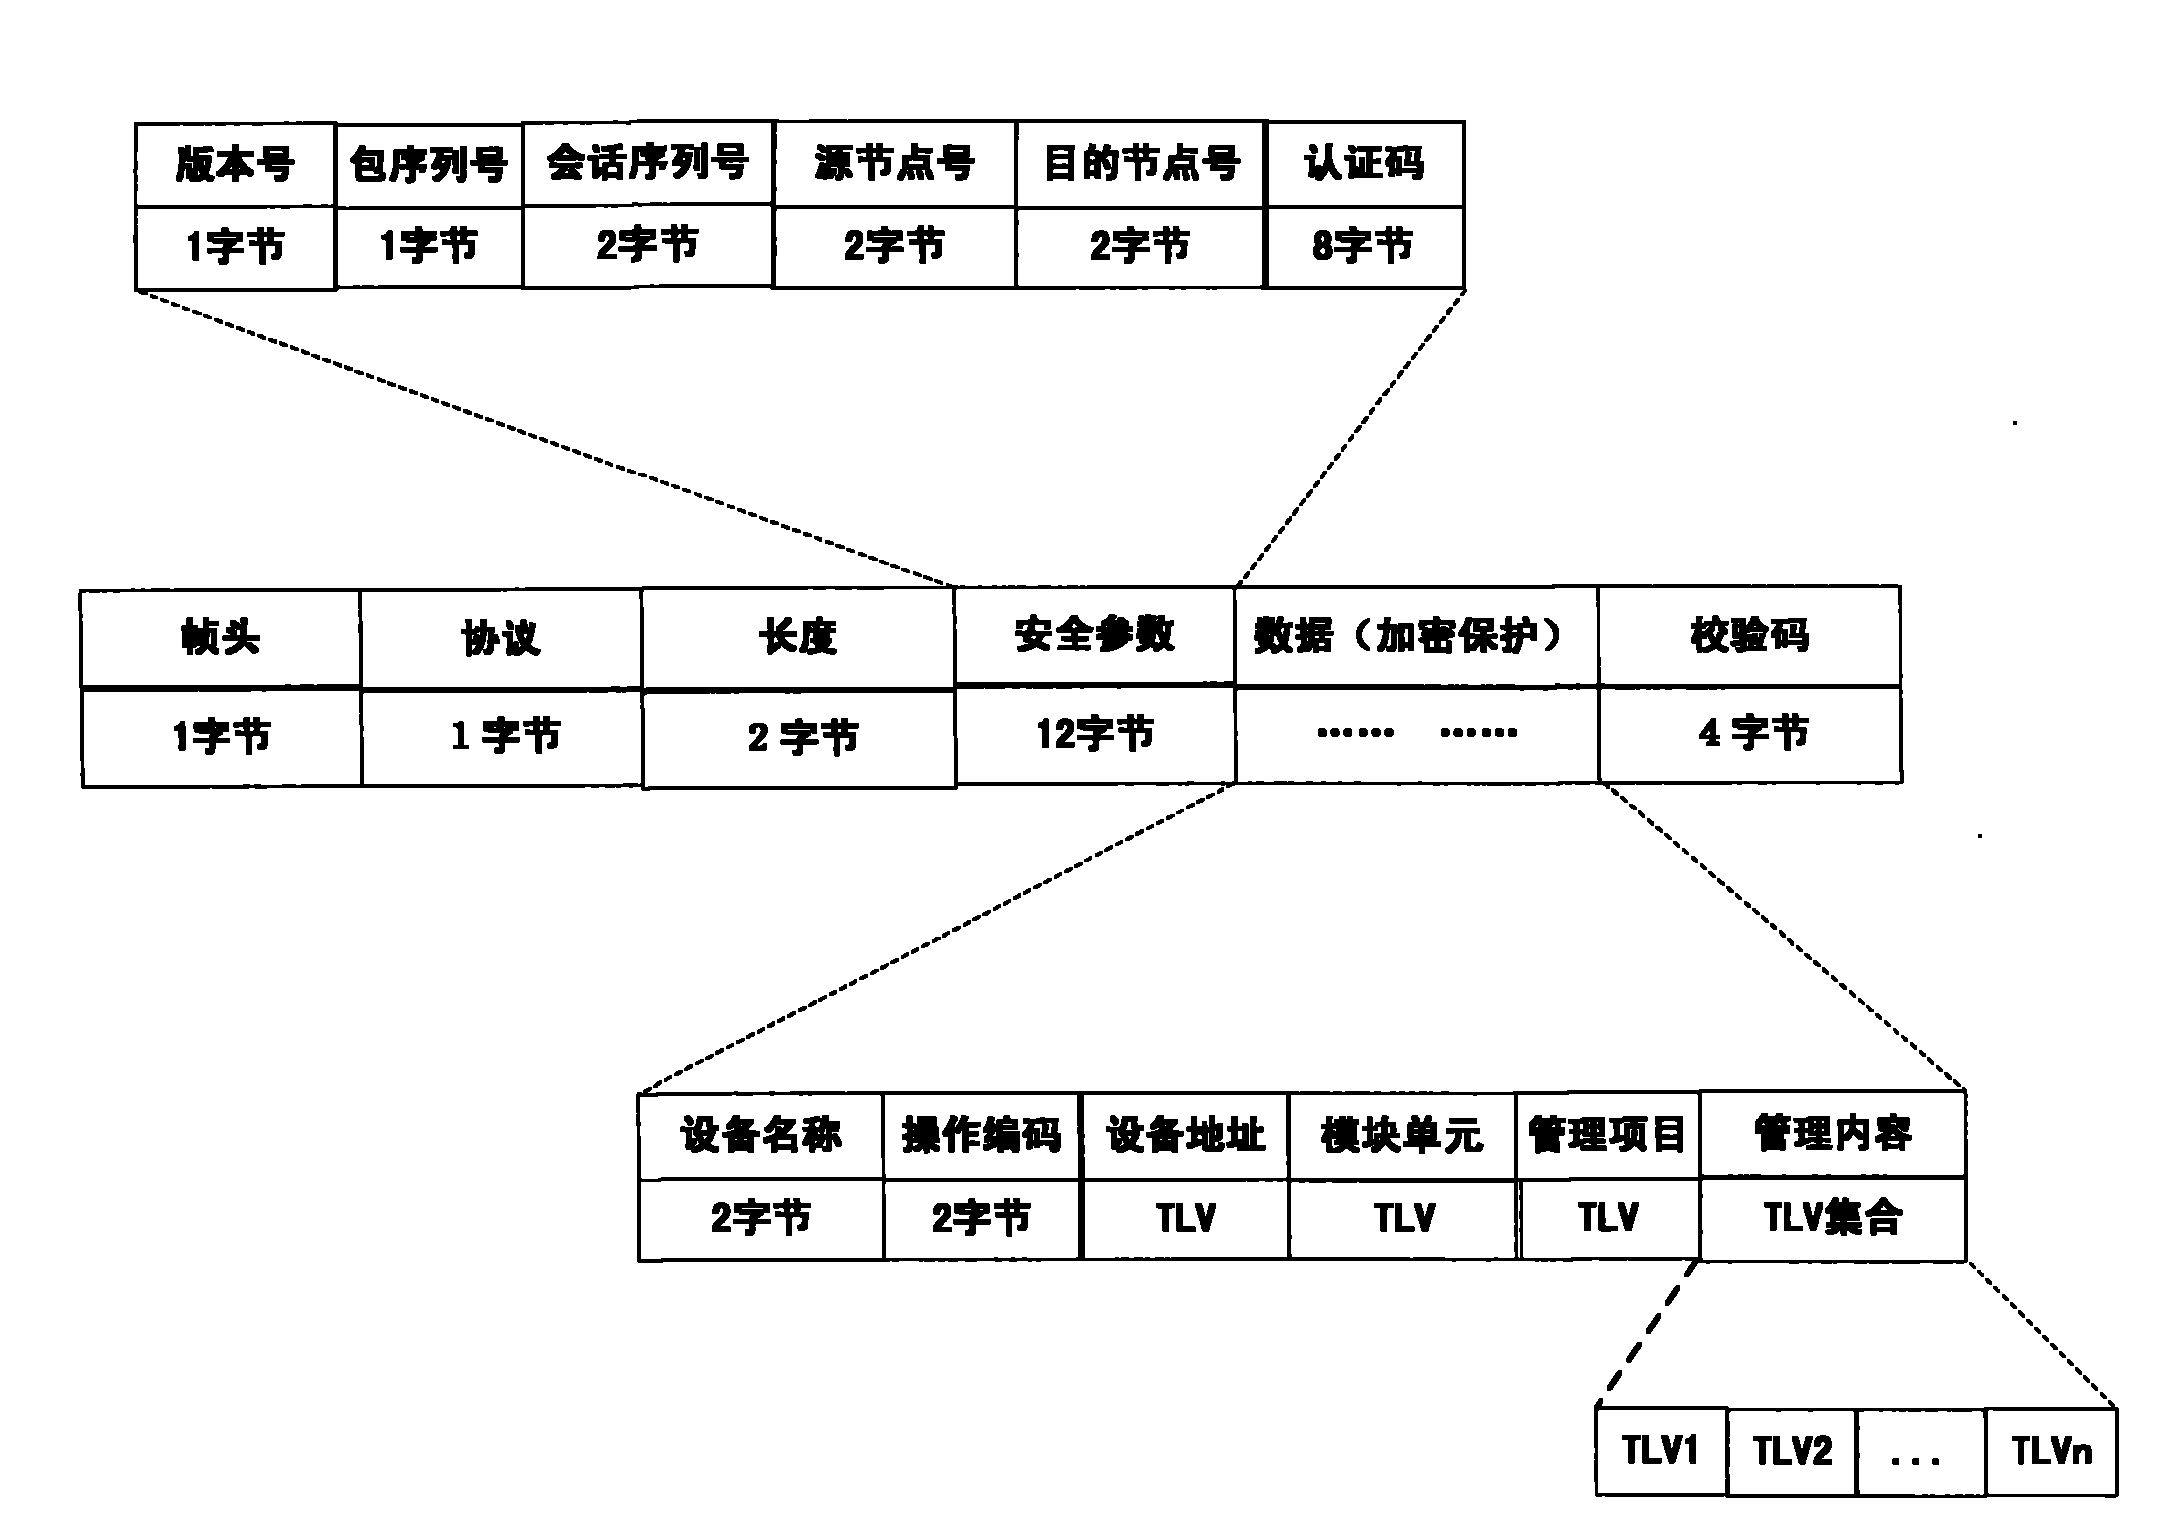 Method for managing network elements by network management system